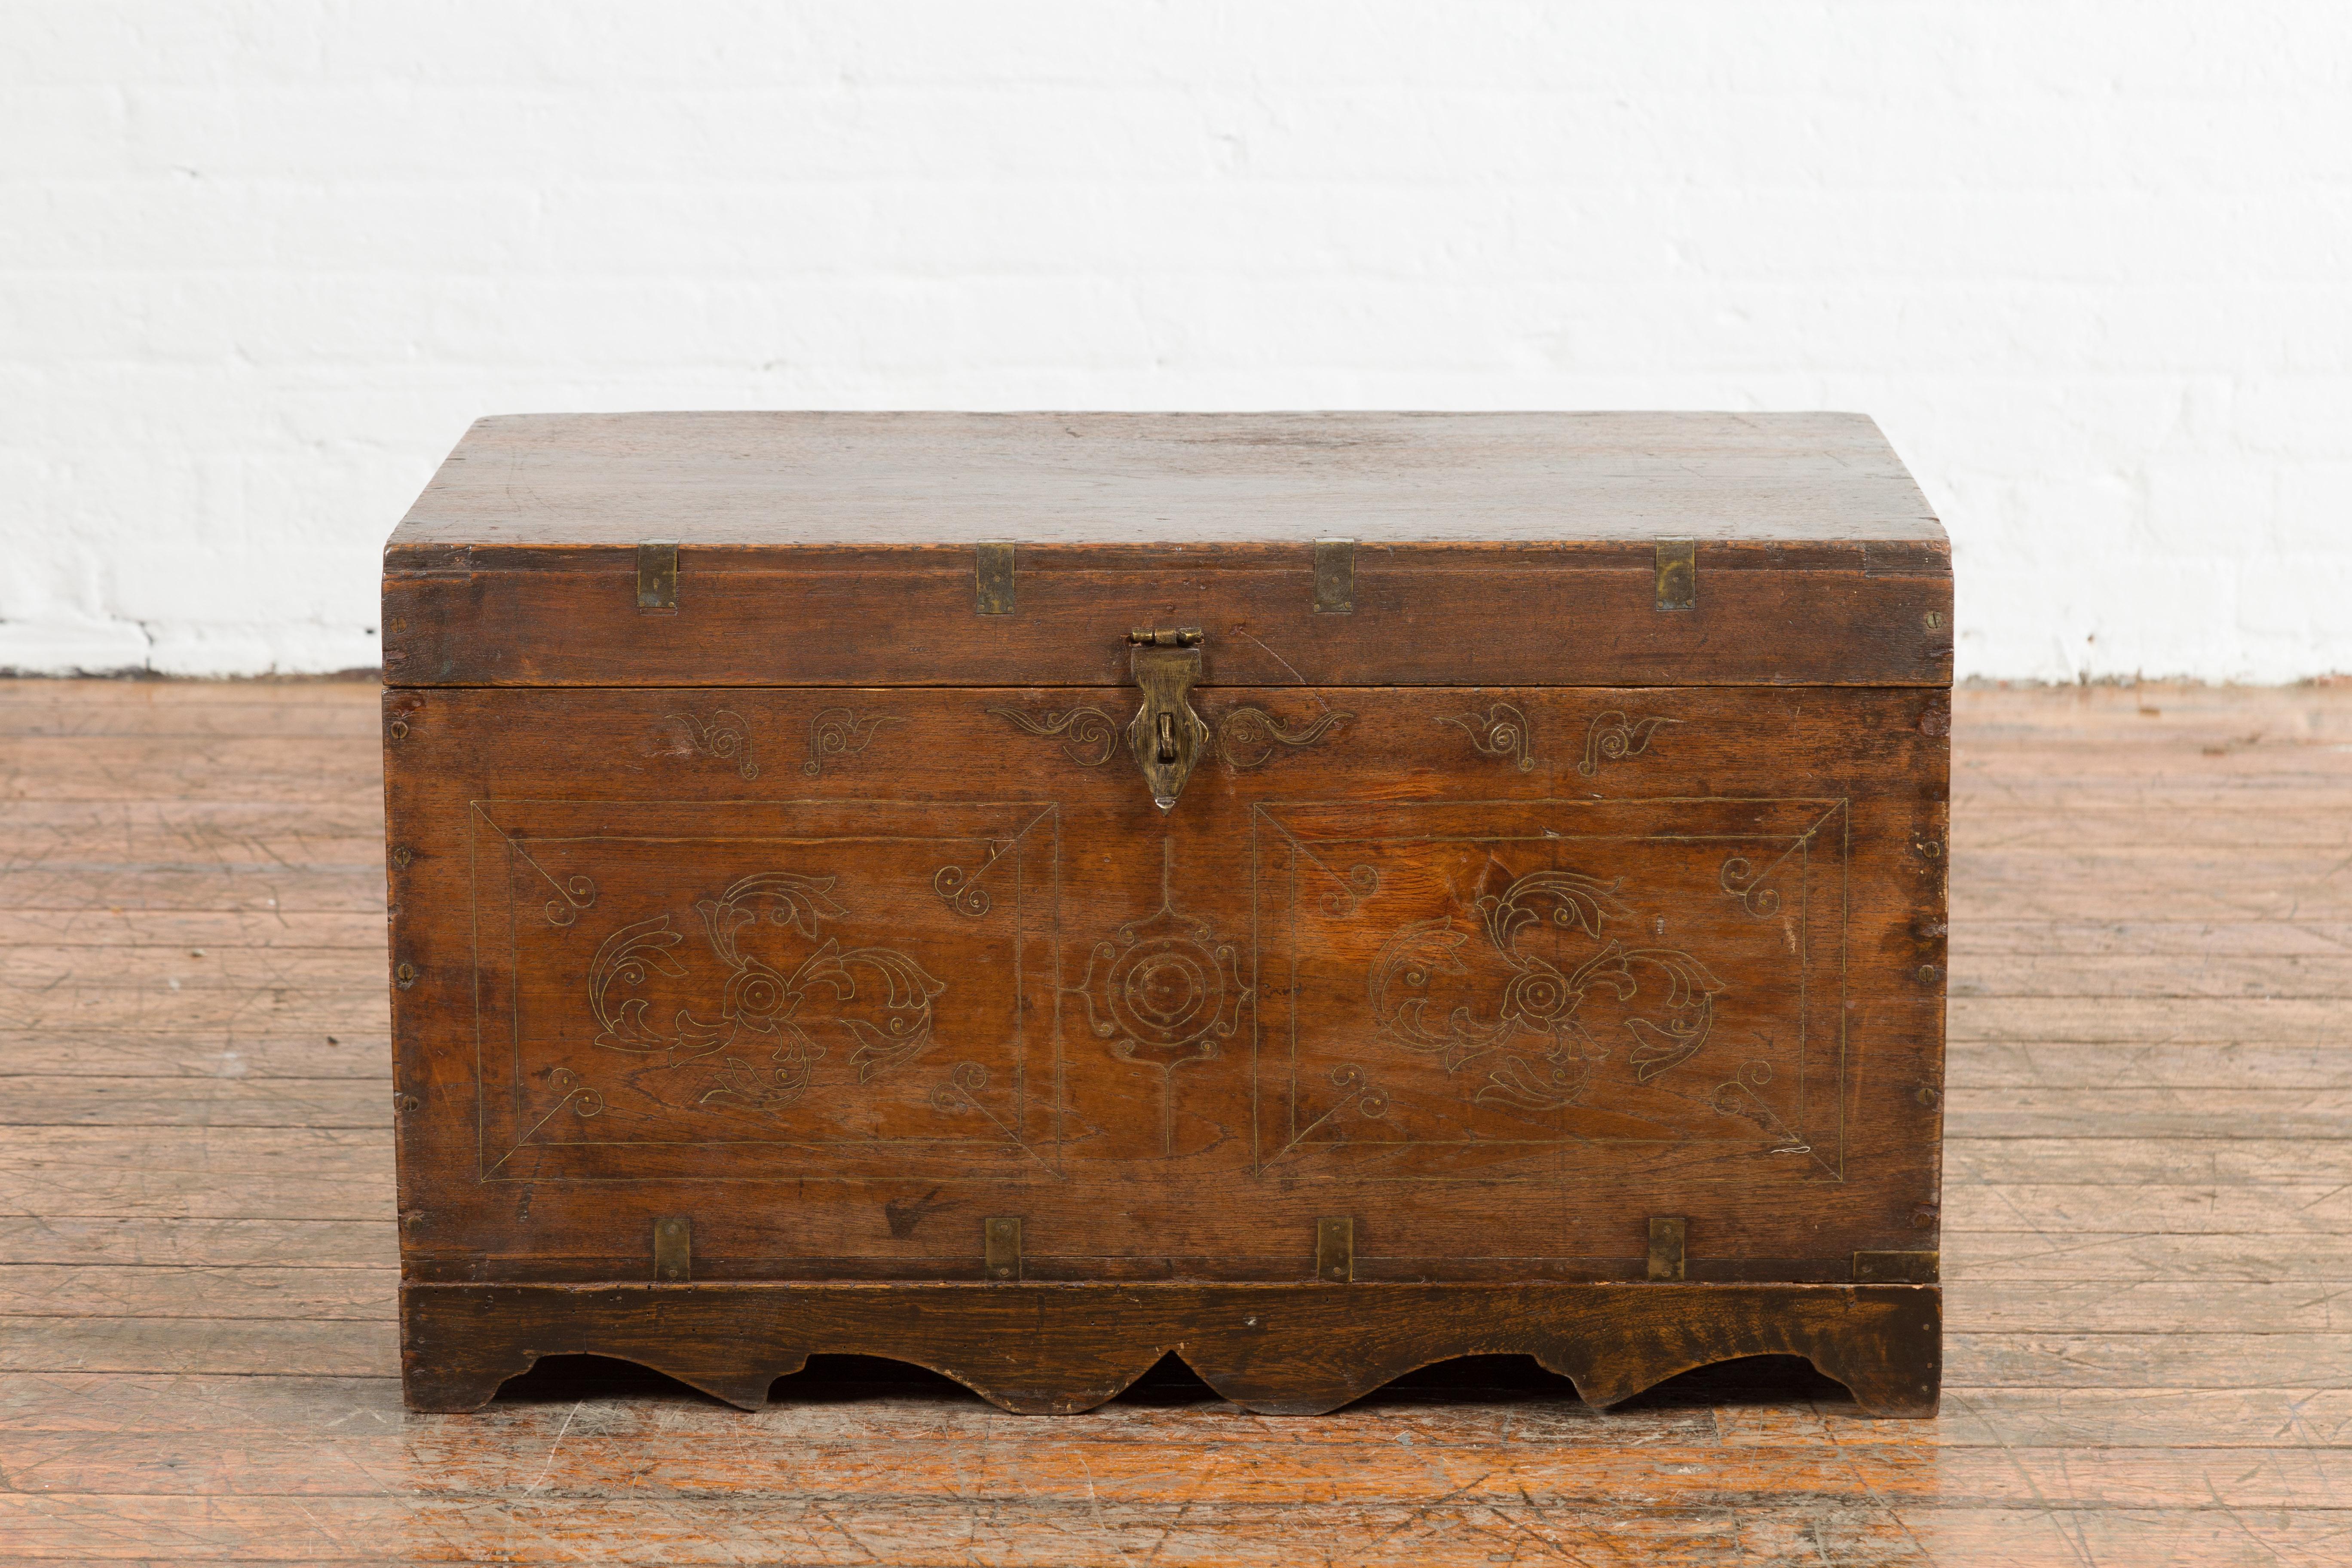 A Indian wedding chest from the mid 20th century, with brass accents, multiple jewelry compartments, floral décor and petite central mirror. Created in India during the midcentury period, this wooden wedding chest is adorned with an inlaid brass